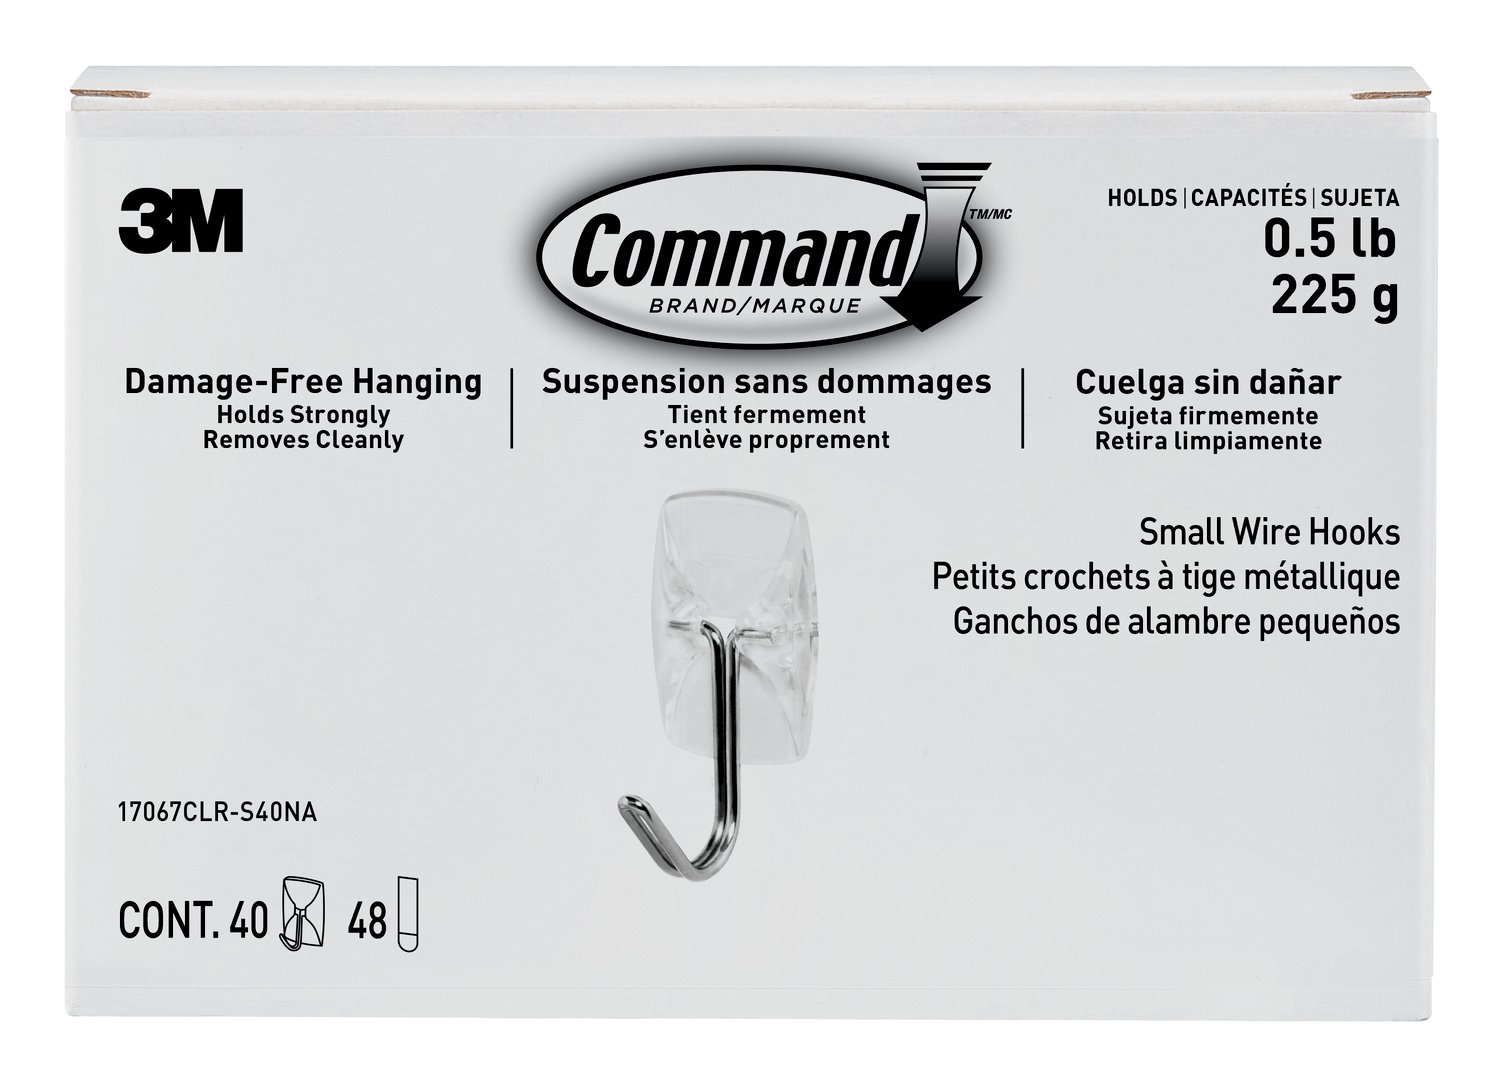 https://www.e-aircraftsupply.com/ItemImages/80/1804539E_command-clear-small-wire-hook-17067clr-s40na.jpg